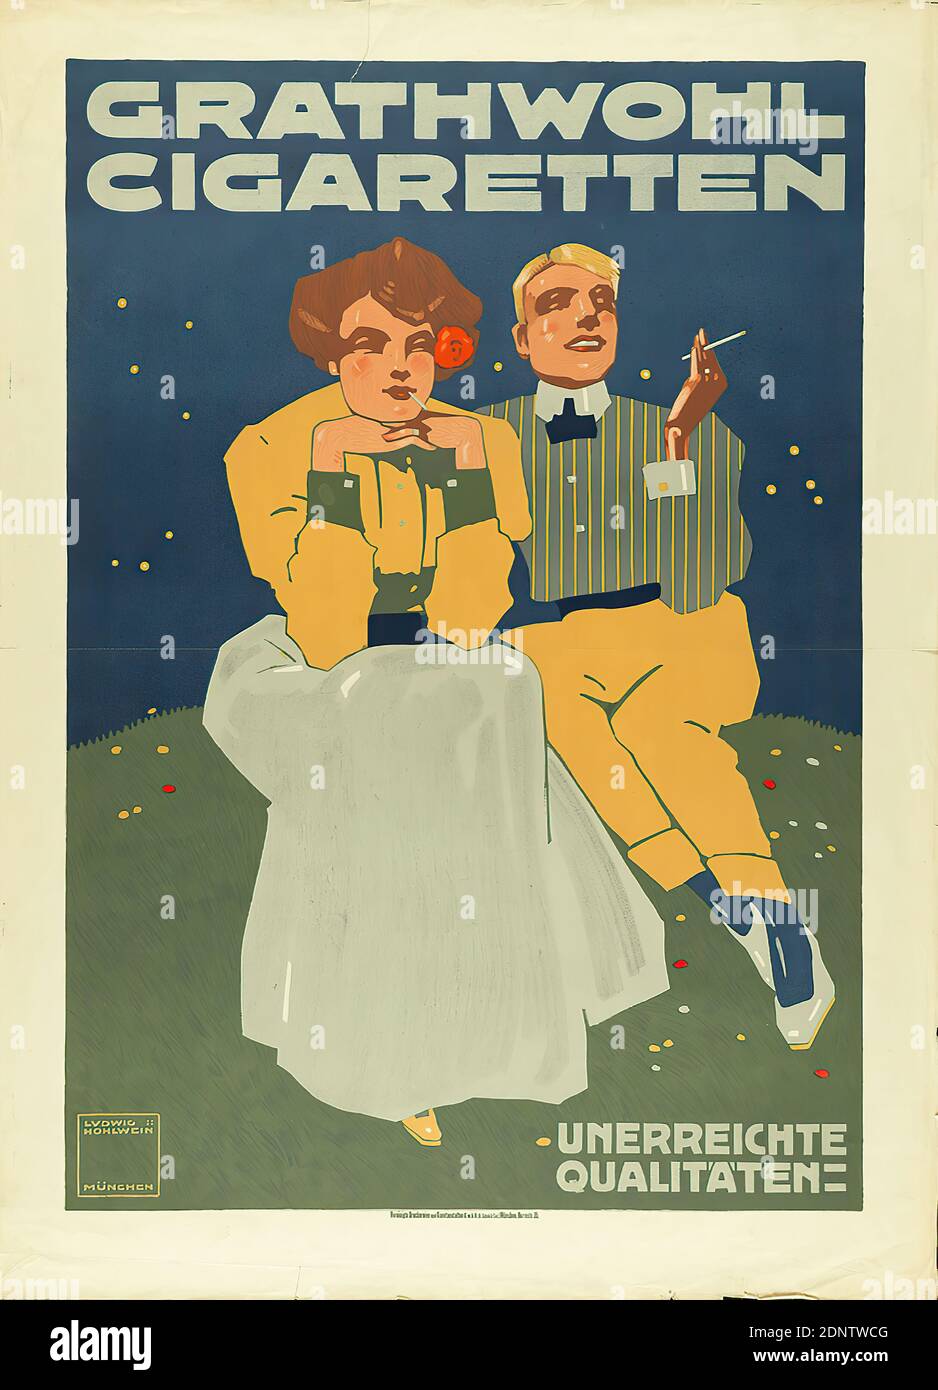 G. Schuh & Cie. (Munich), Ludwig Hohlwein, Gratwohl Cigarettten, paper,  lithography, total: height: 125 cm; width: 91 cm, signed and inscribed: u.  li. in the printing plate: LUDWIG HOHLWEIN MÜNCHEN, product advertisement (